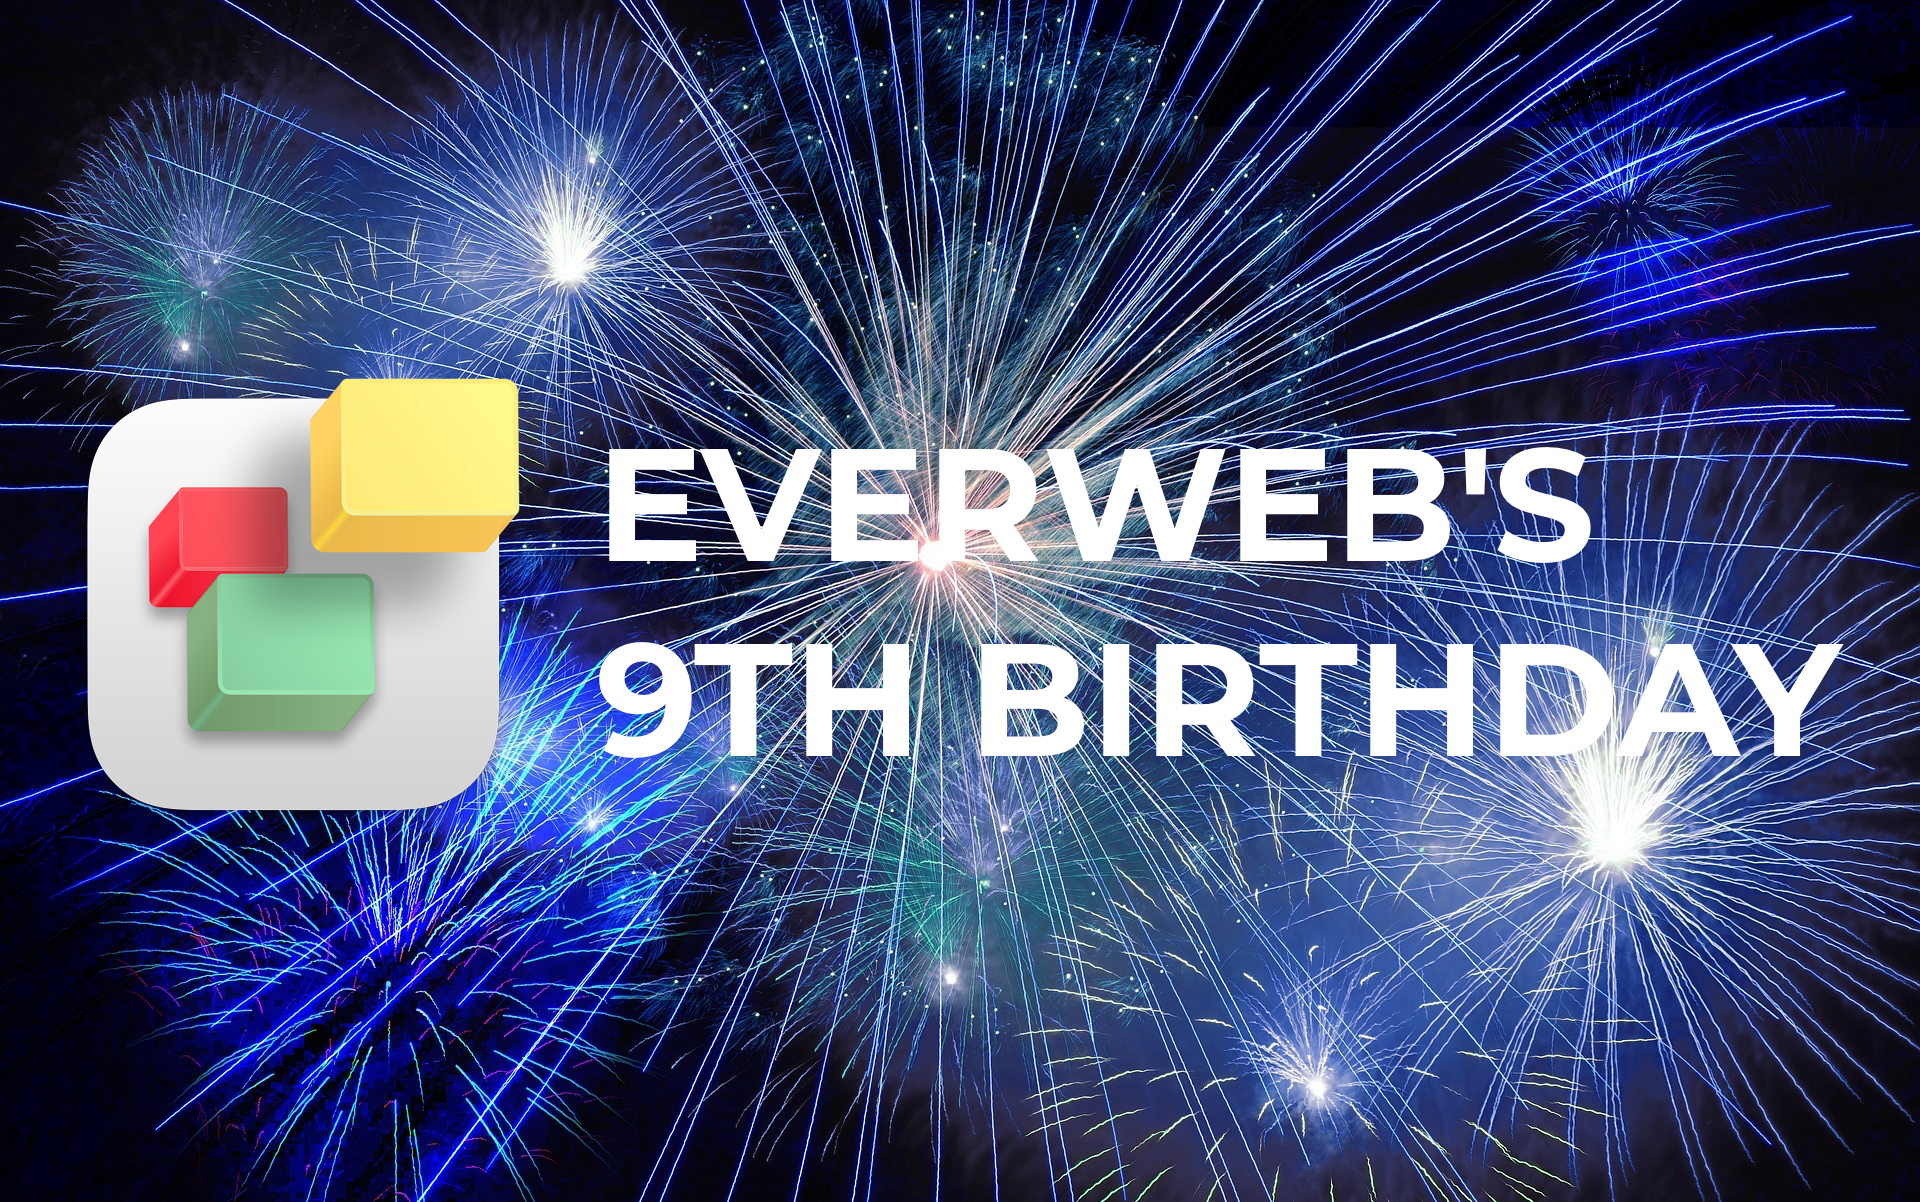 EverWeb's 9th Birthday: The Year in Review